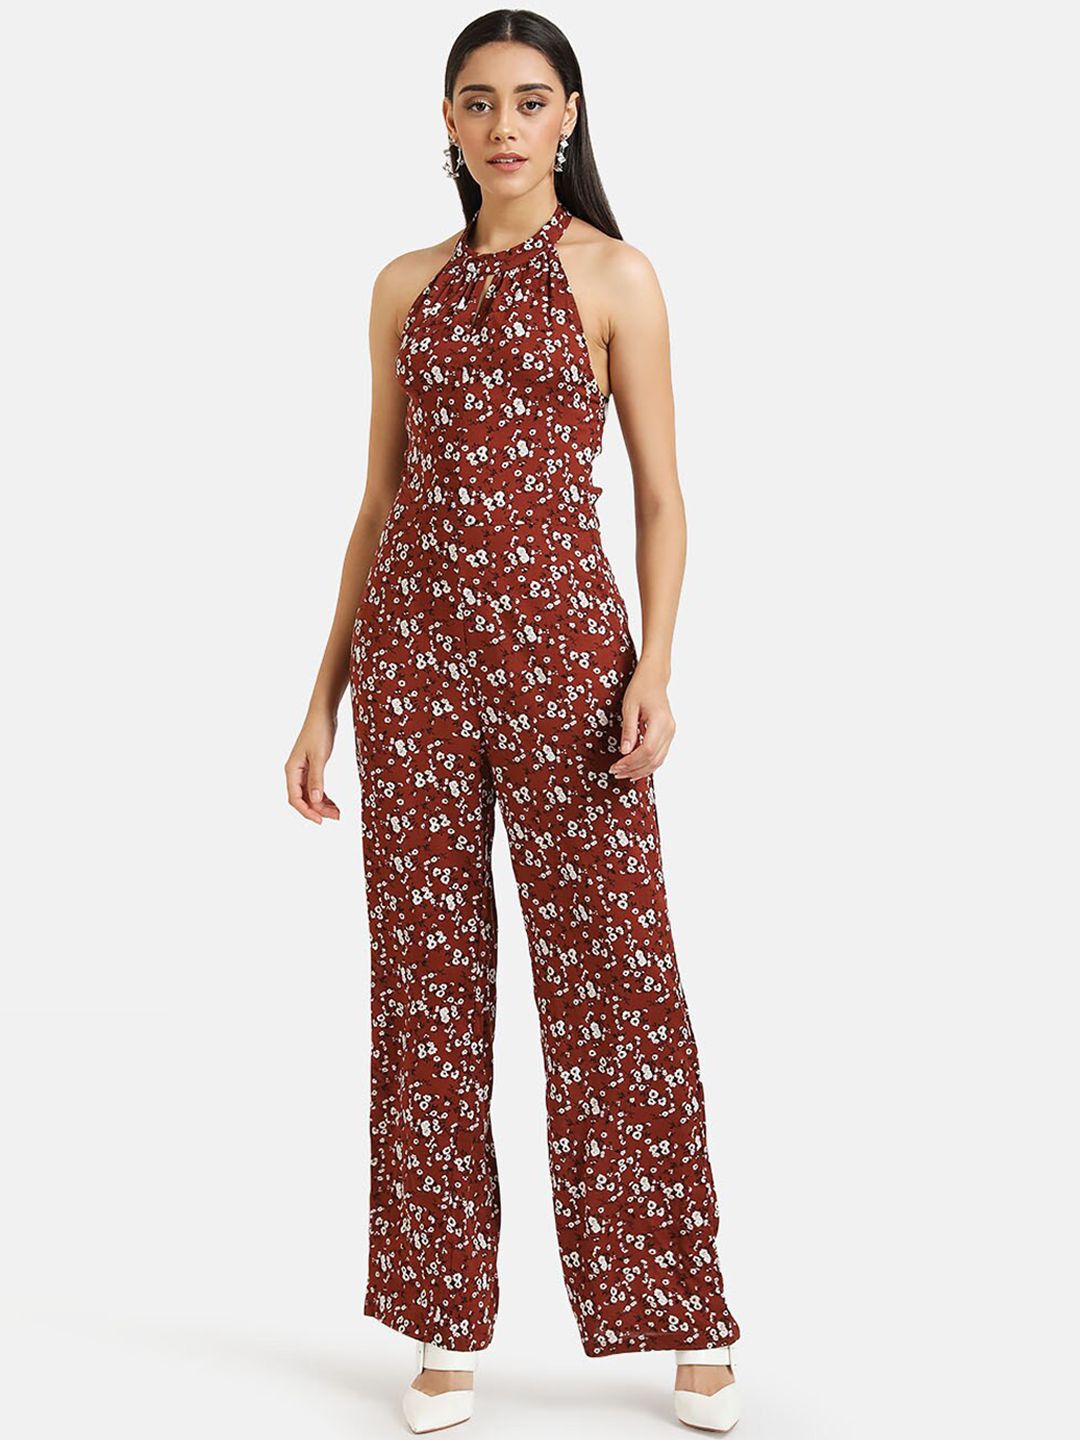 Kazo Women Brown & Off-White Floral Printed Basic Jumpsuit Price in India